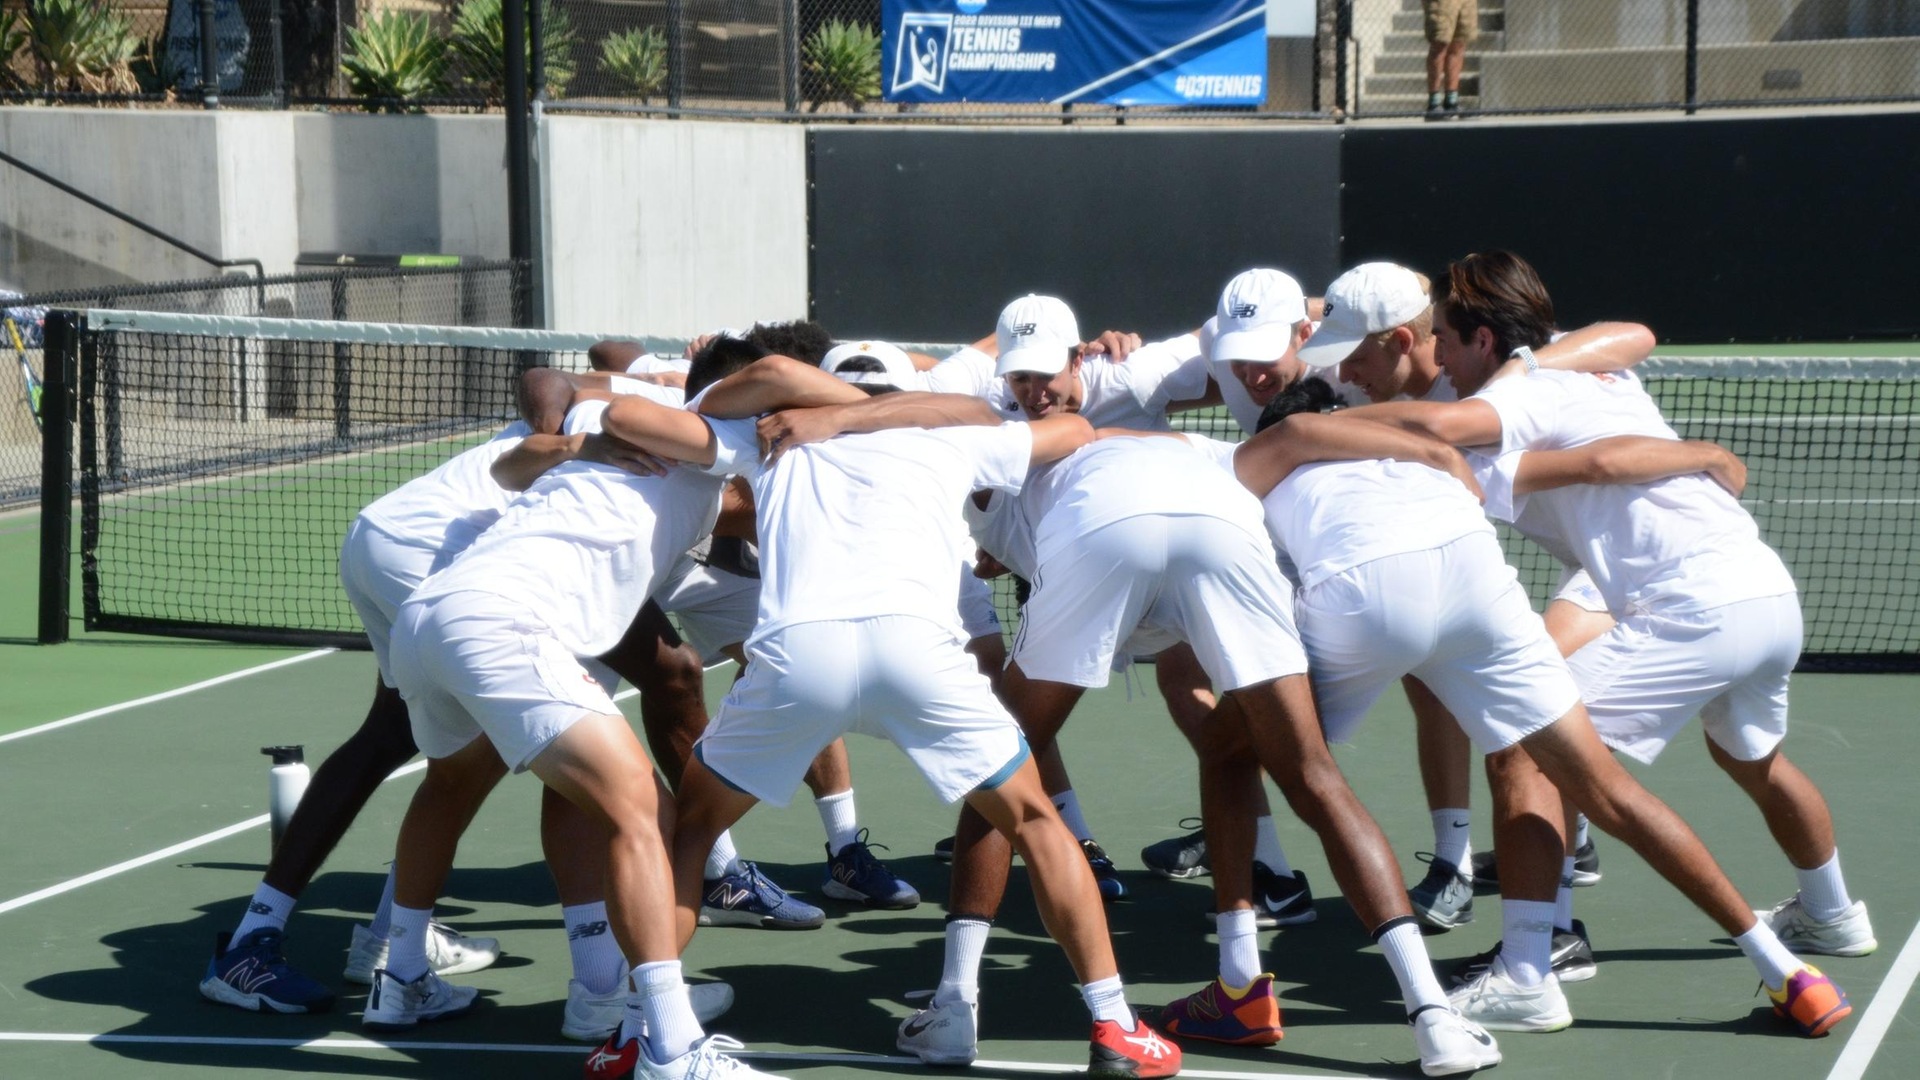 CMS men's tennis will make its 11th straight trip to nationals